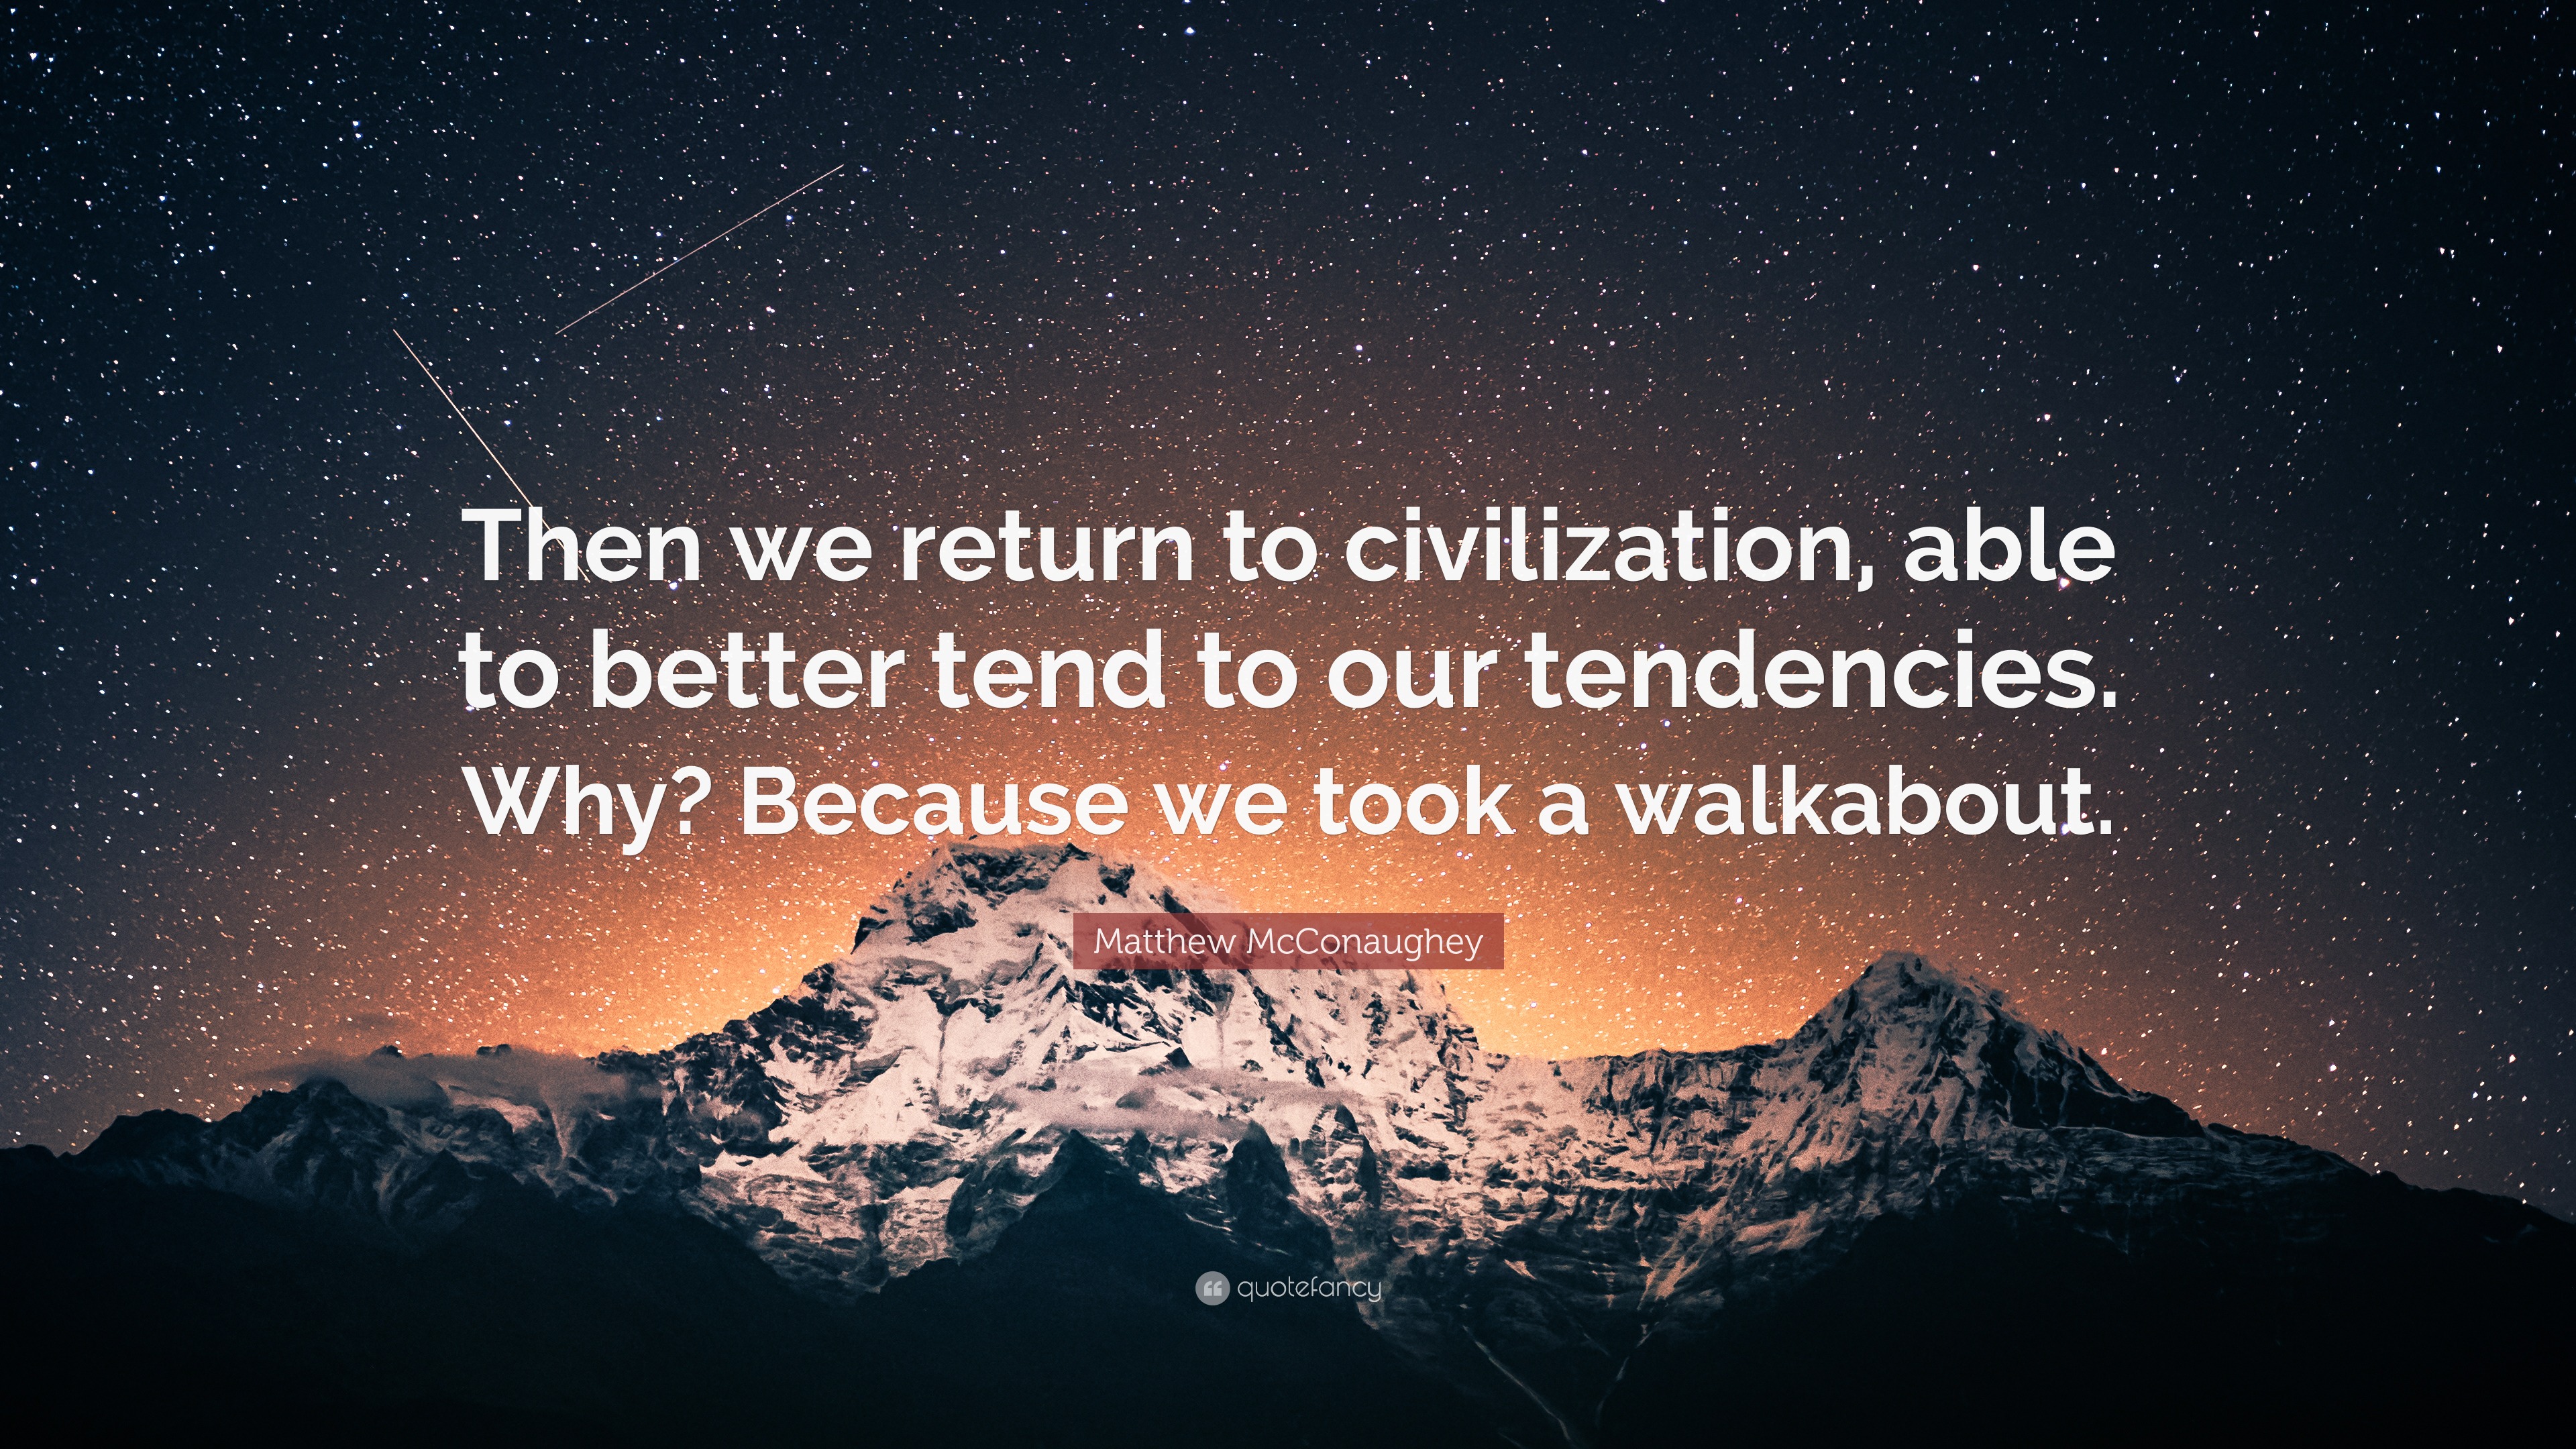 Matthew McConaughey Quote: “Then we return to civilization, able to ...